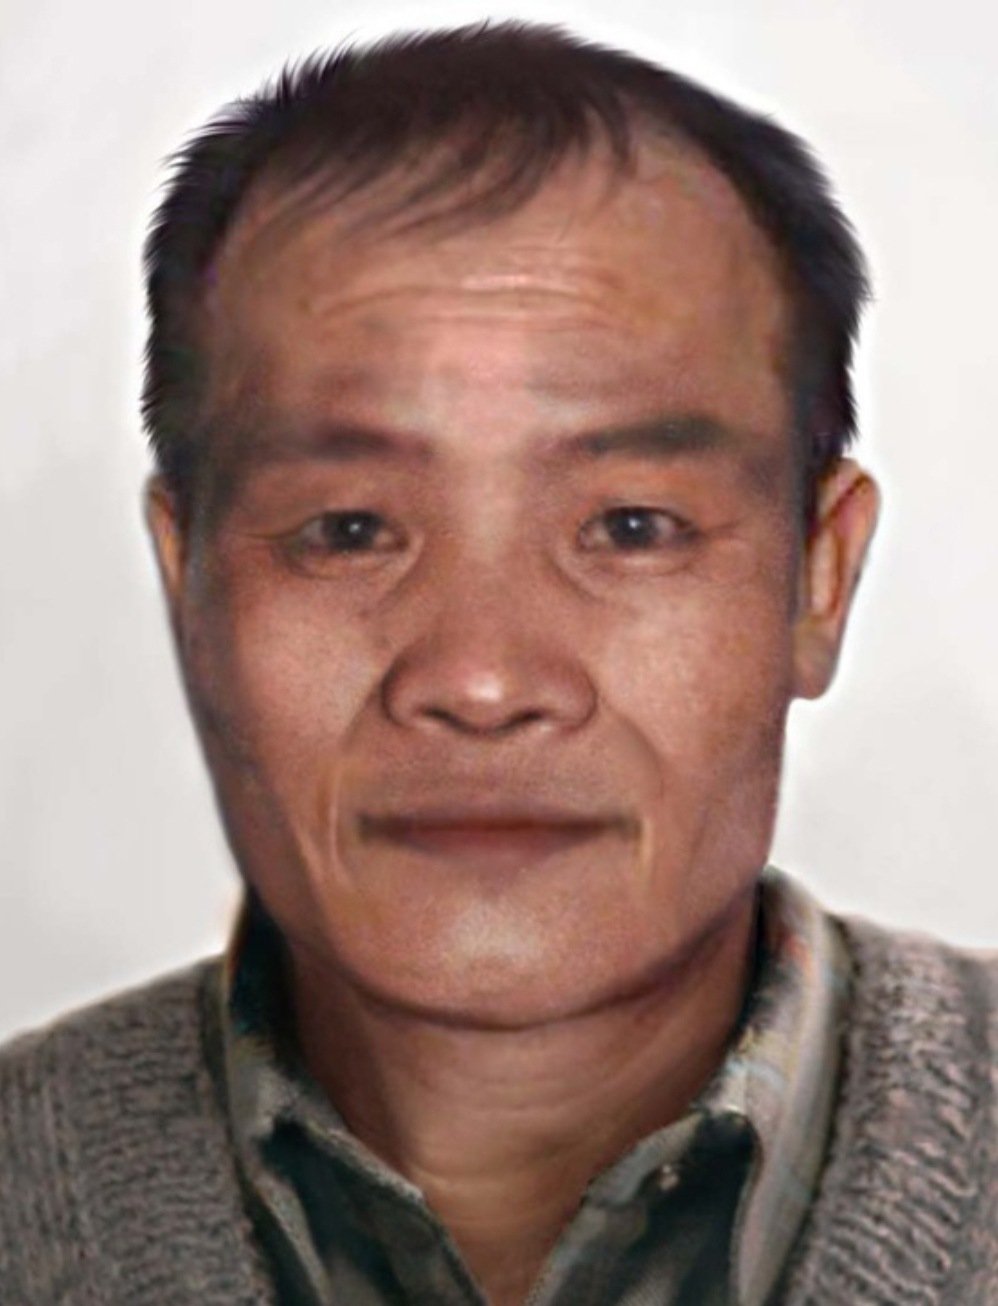 Hung Tien Pham is wanted for his alleged involvement in the execution-style murders of five men at a Chinatown social club in Boston,